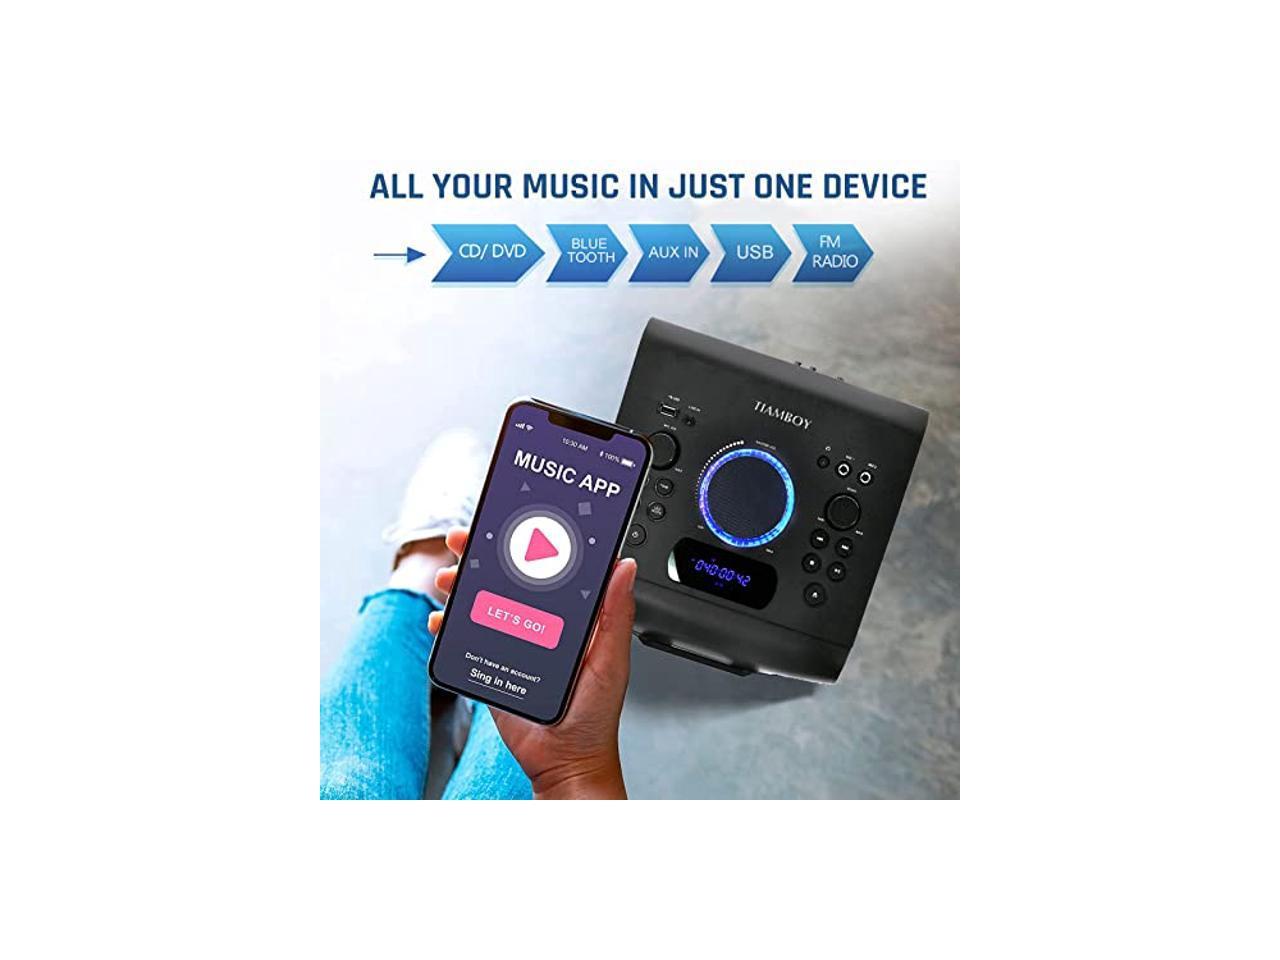 Bass/Echo Adjustable AUX-in DSP-Tech Bluetooth Floorstanding Speaker with CD/DVD Player USB Home Stereo System Party Speaker Karaoke MIC Ports x 2 Lightshow FM Radio 